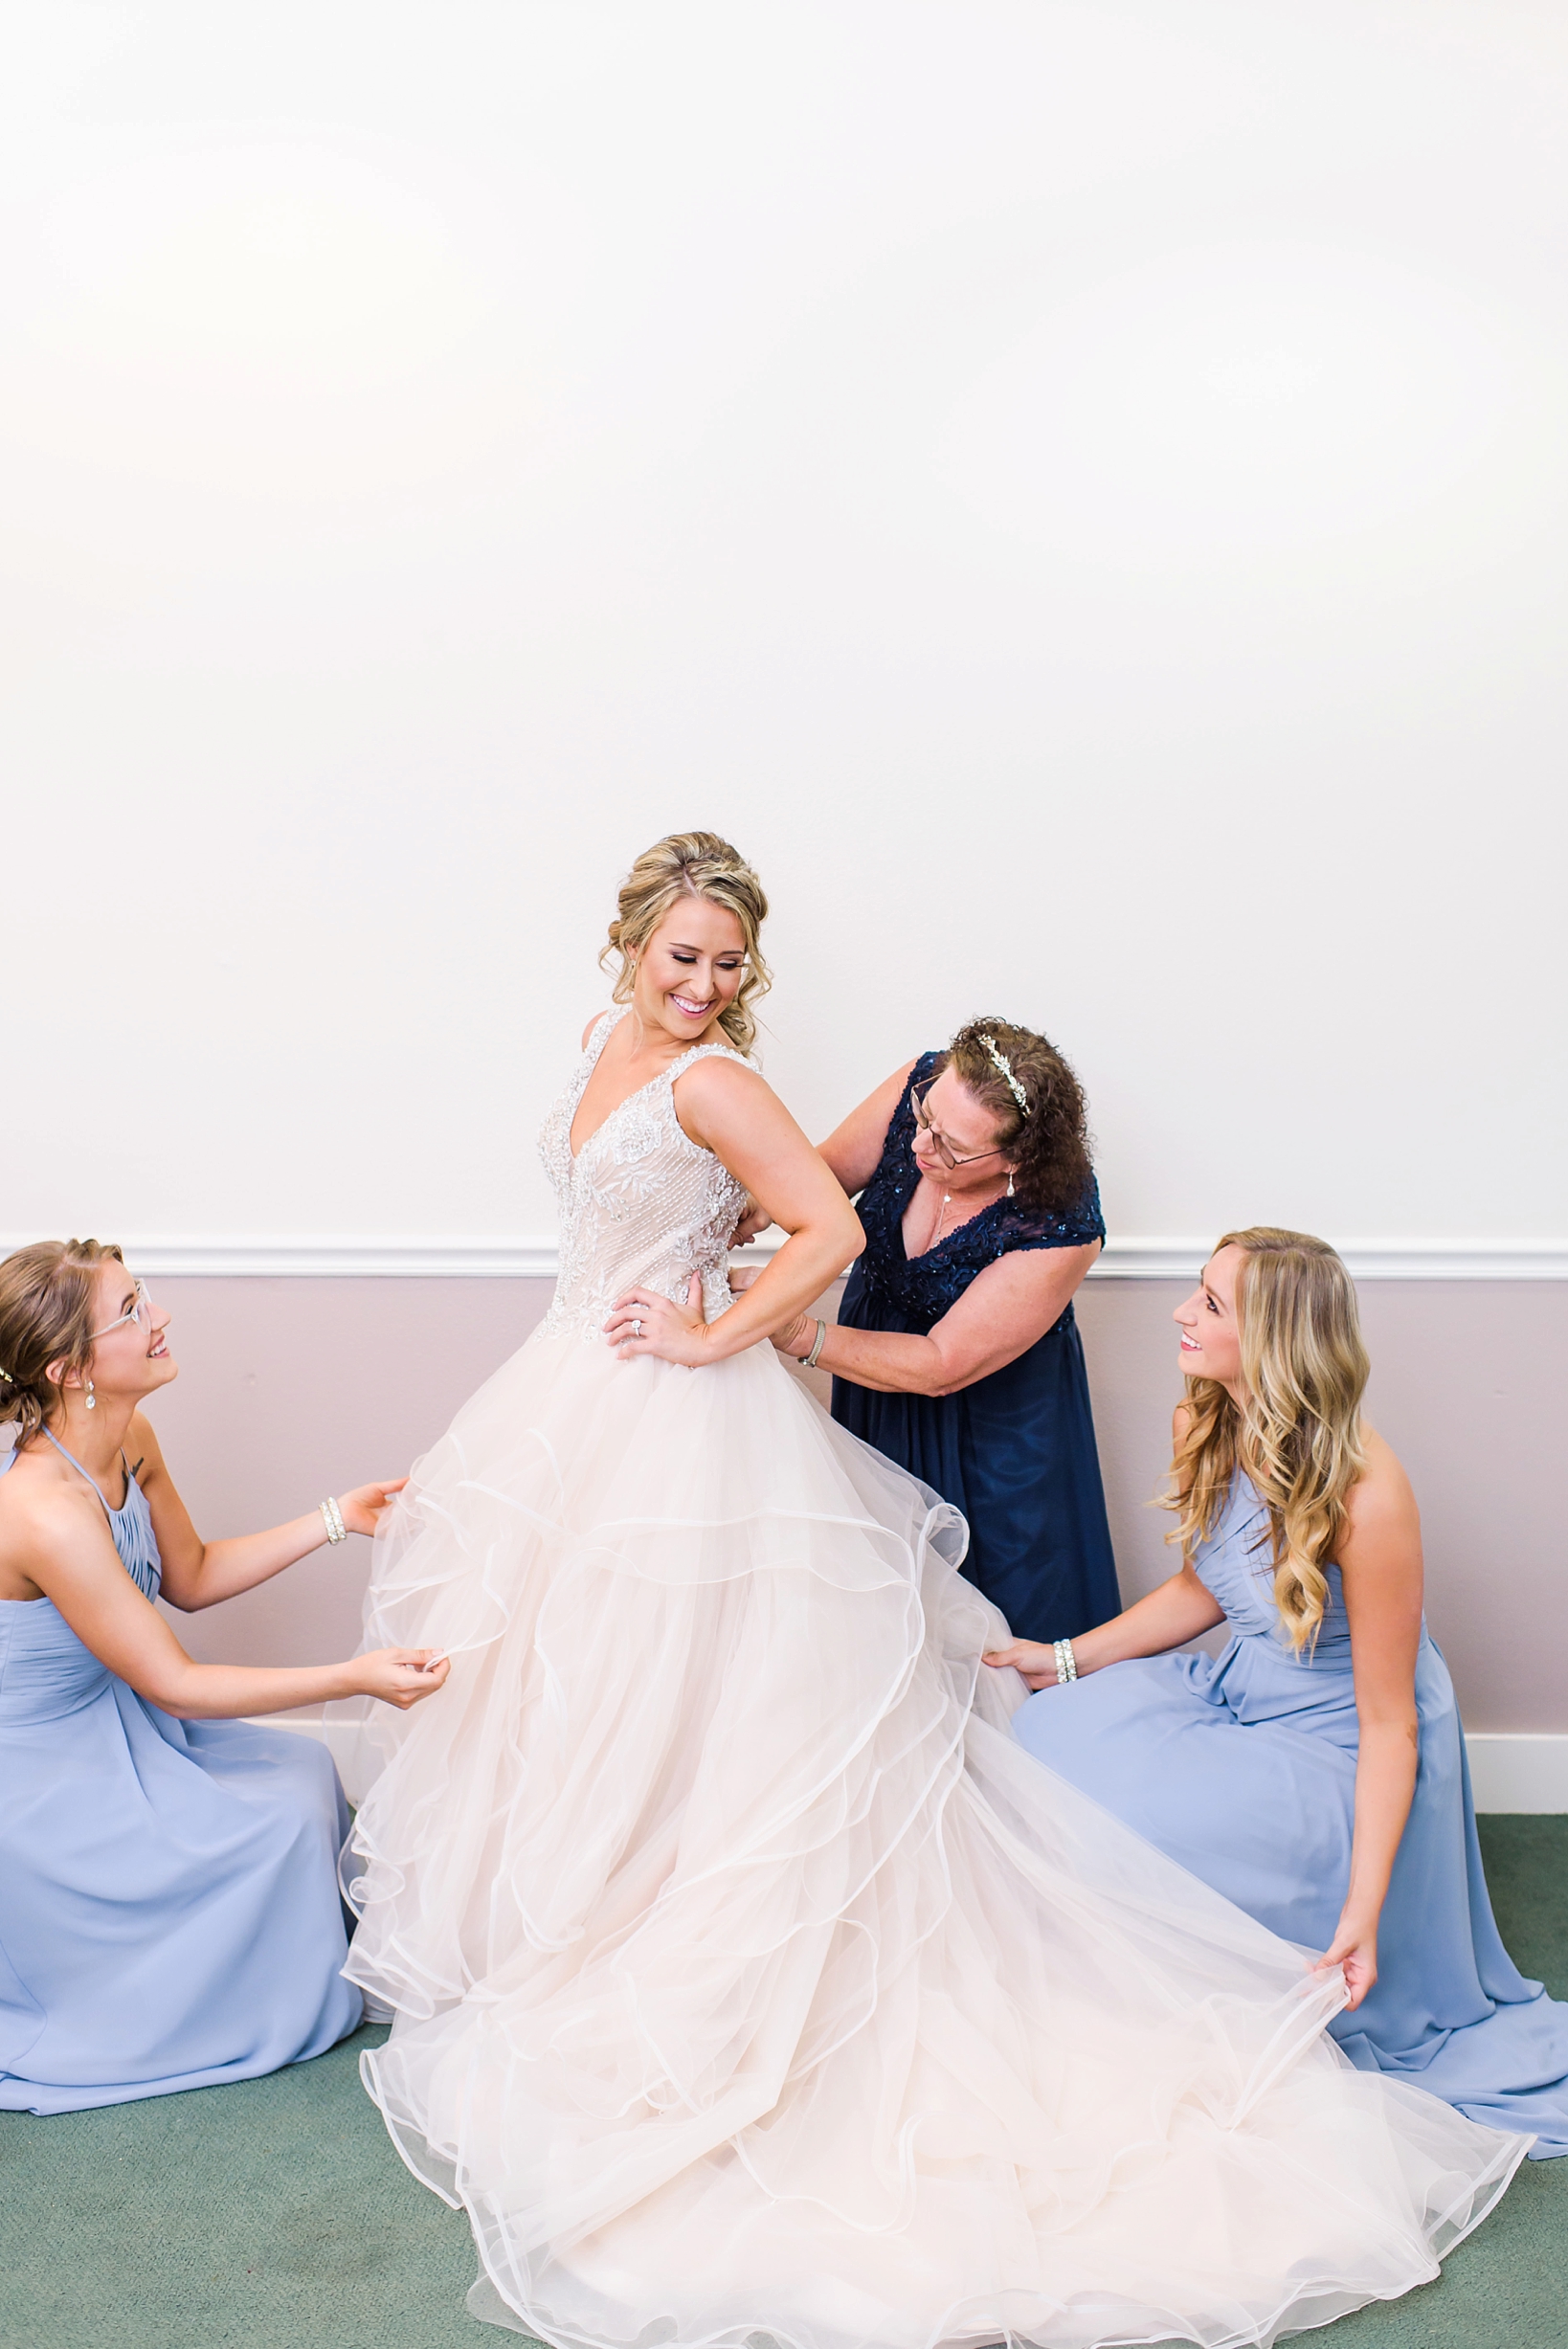 The mother of the bride and bridesmaids helping the bride into her dress by Sarah & Ben Photography